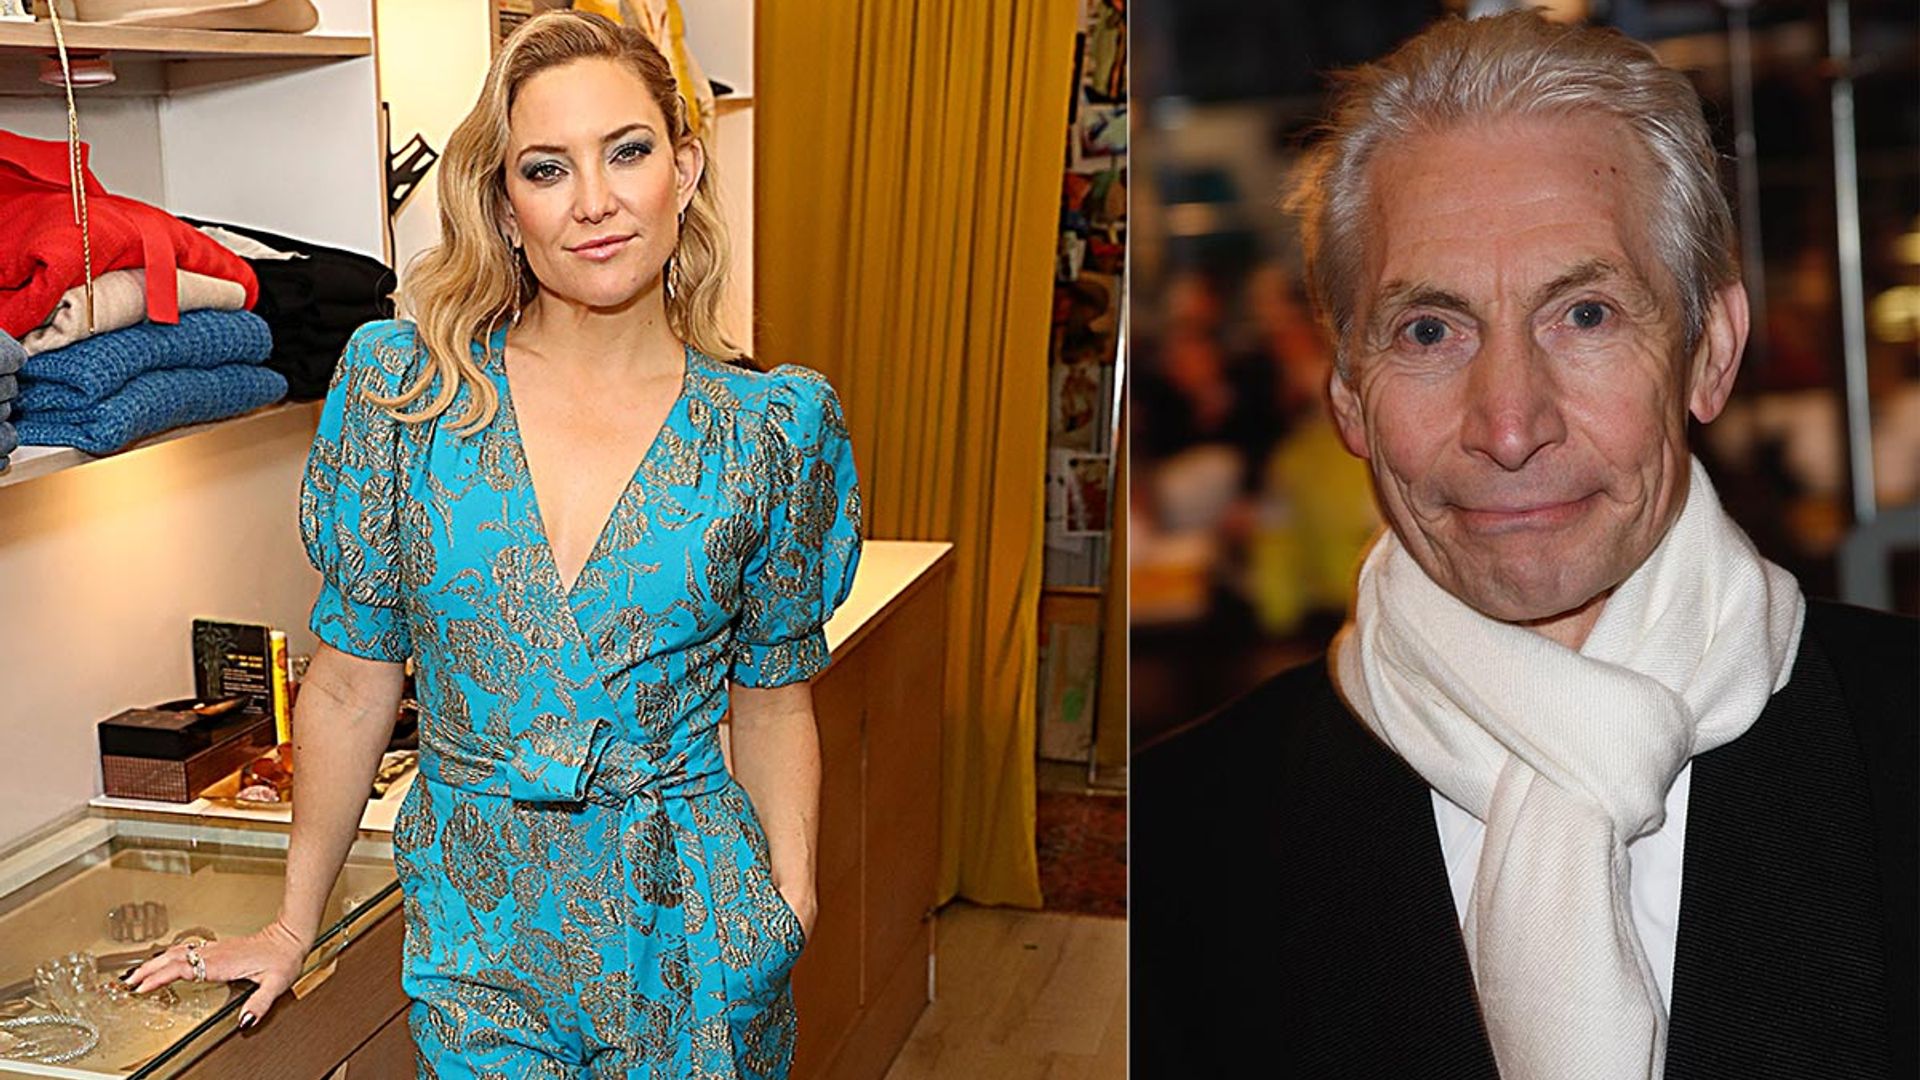 Kate Hudson leaves fans in tears with emotional Charlie Watts tribute